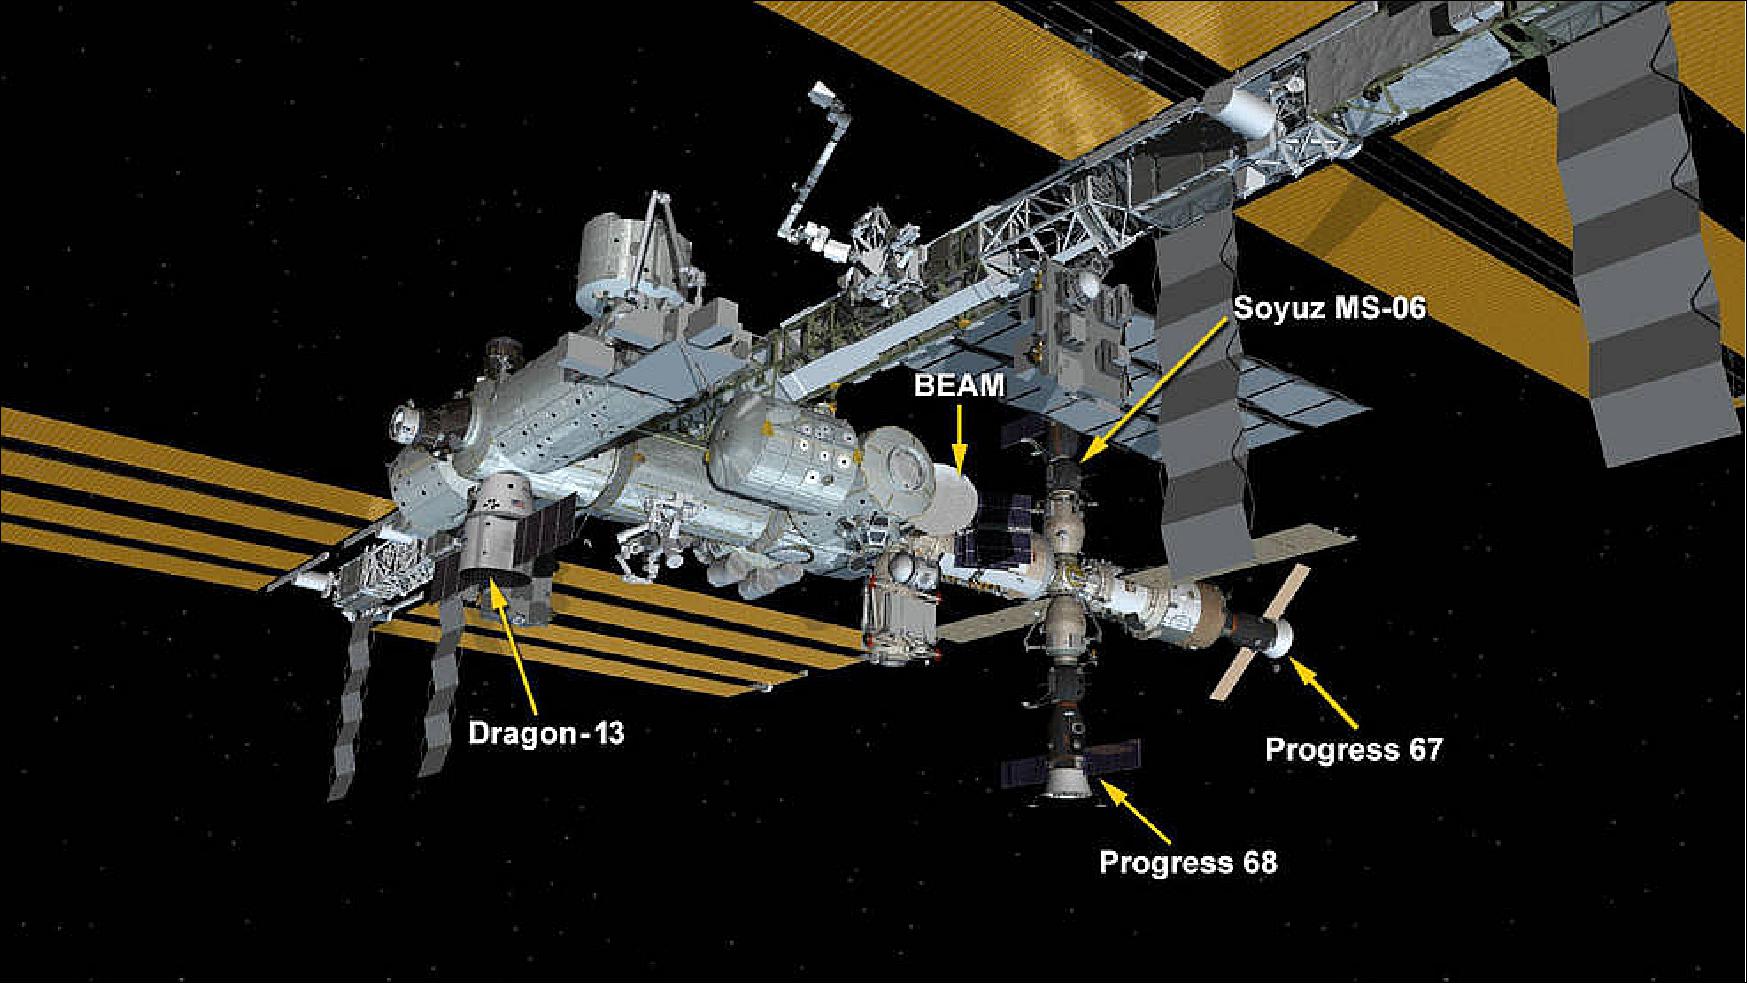 Figure 12: ISS configuration on 17 Dec. 2017. Four spaceships are parked at the space station including the SpaceX Dragon space freighter, the Progress 67 and 68 resupply ships and the Soyuz MS-06 crew ship (image credit: NASA) 15)